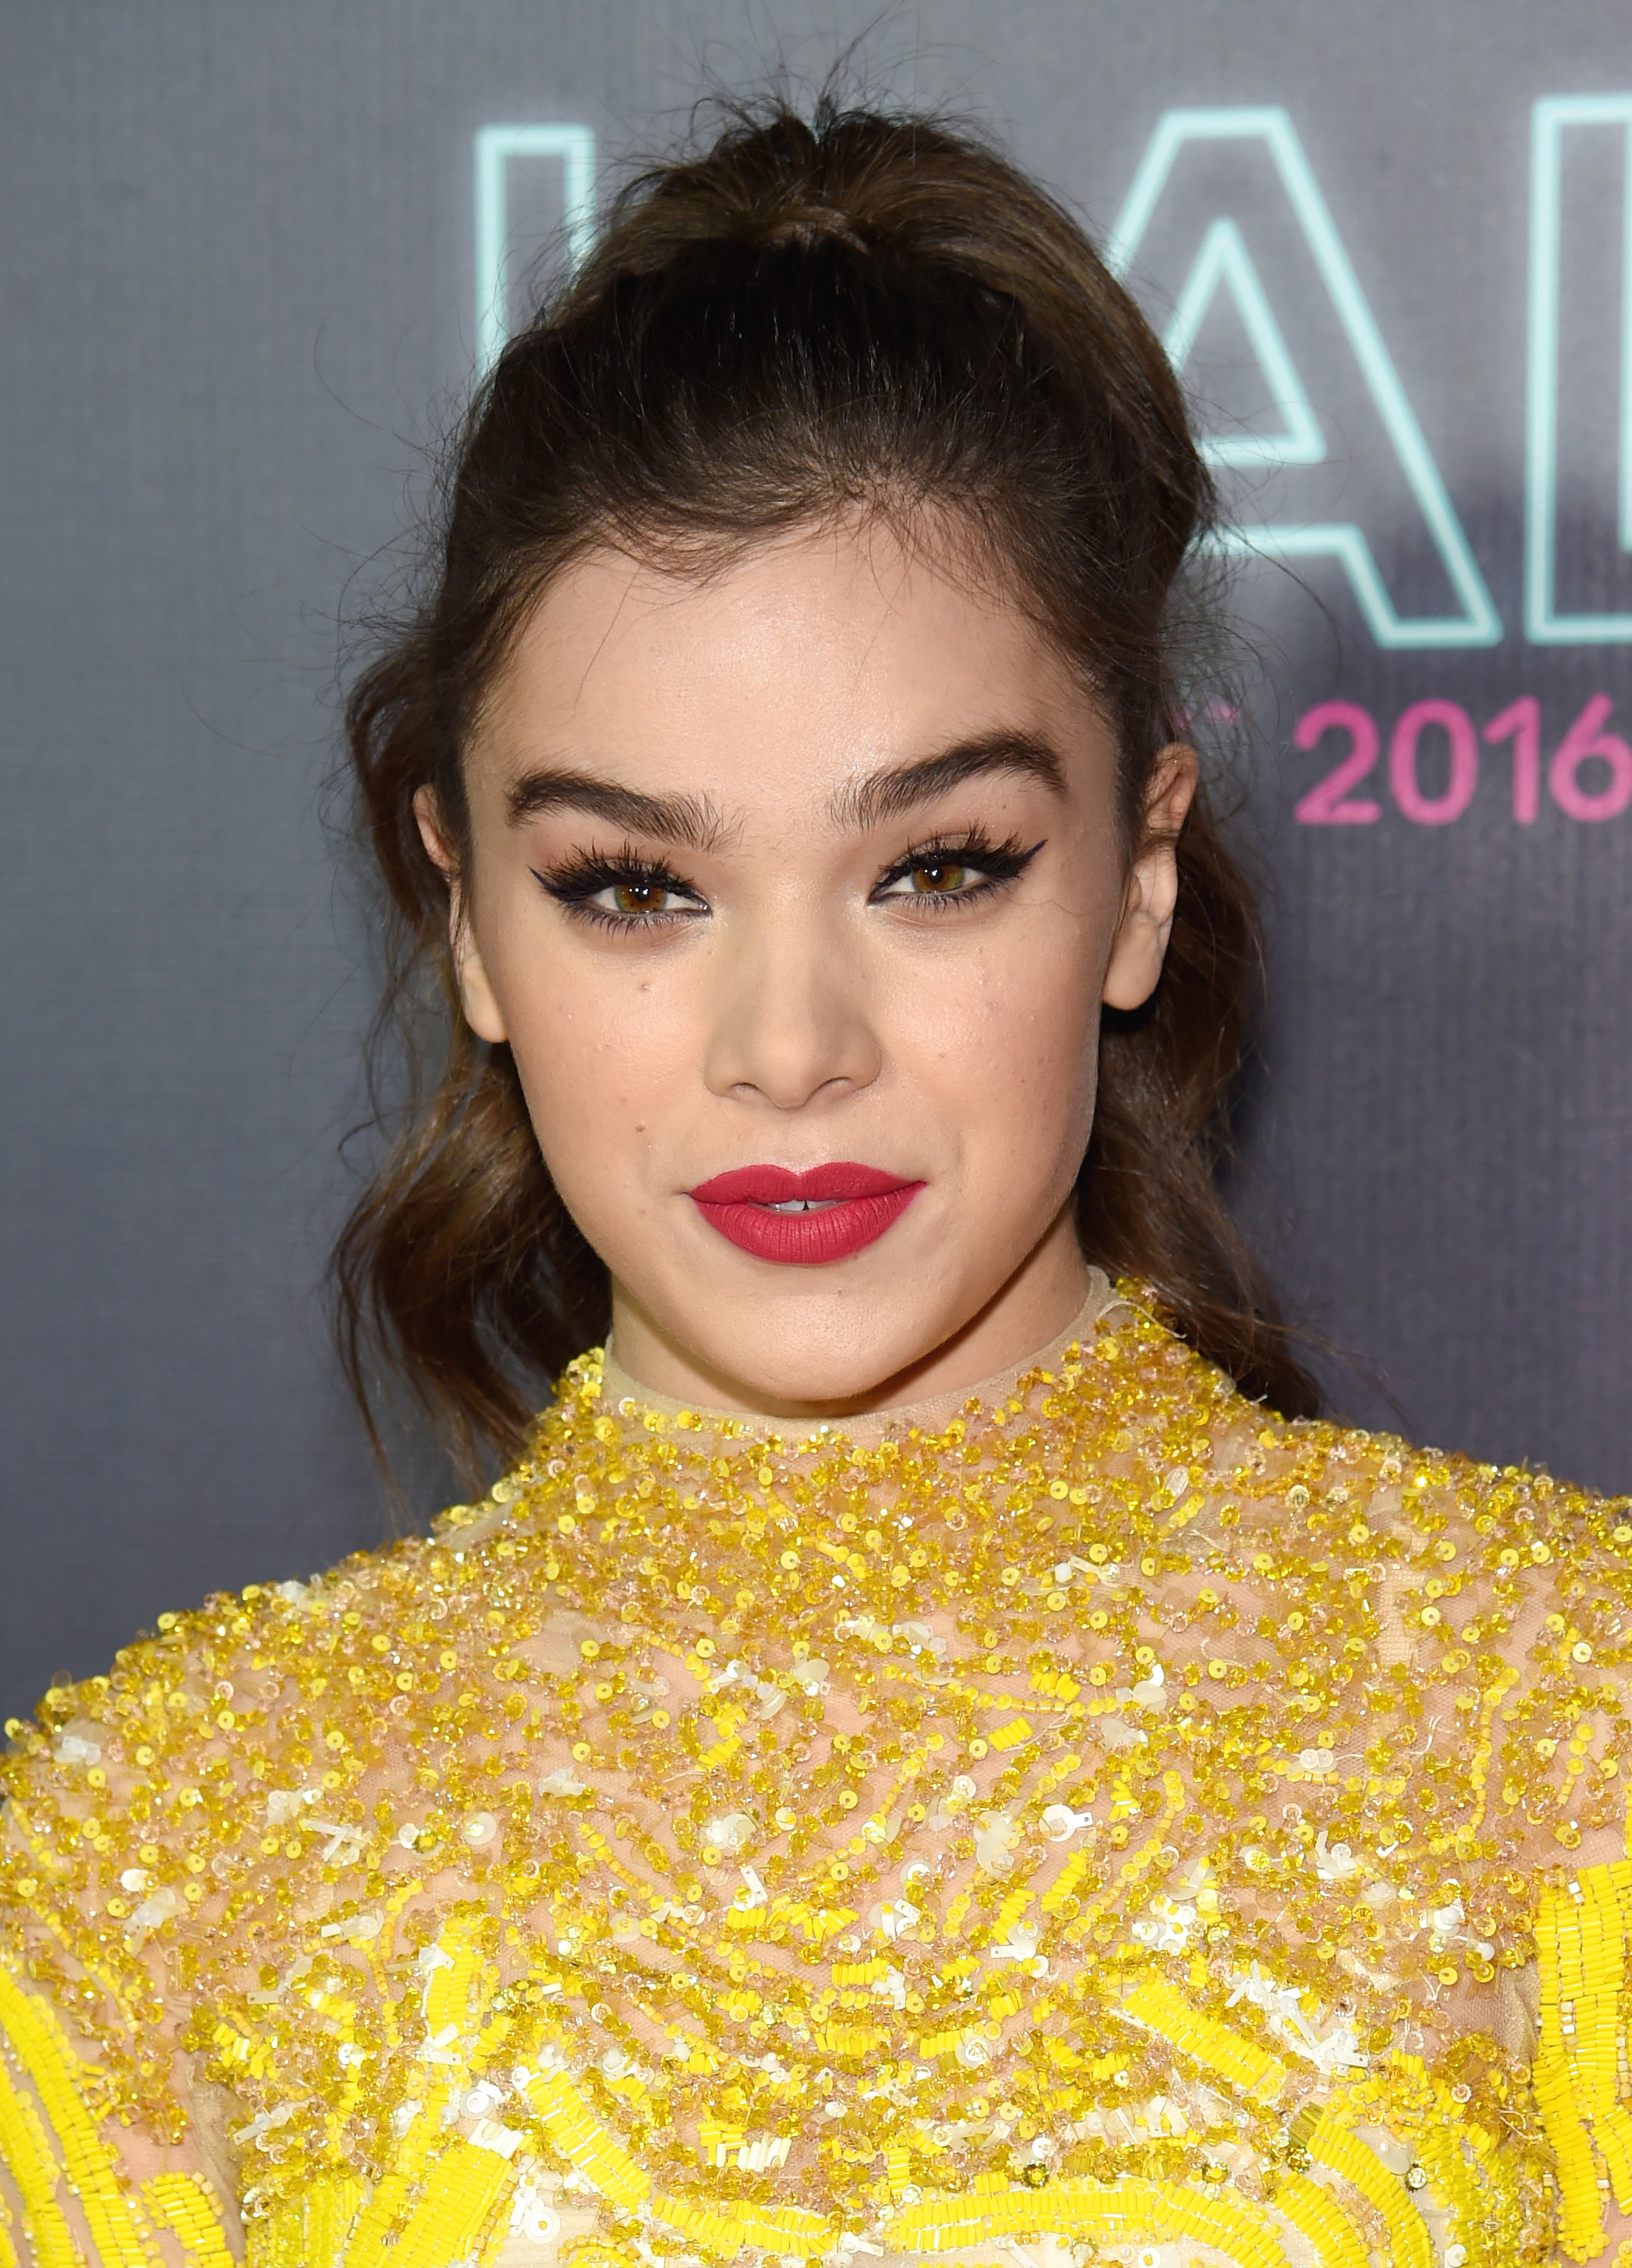 Hailee Steinfeld at the Nickelodeon Halo Awards 20